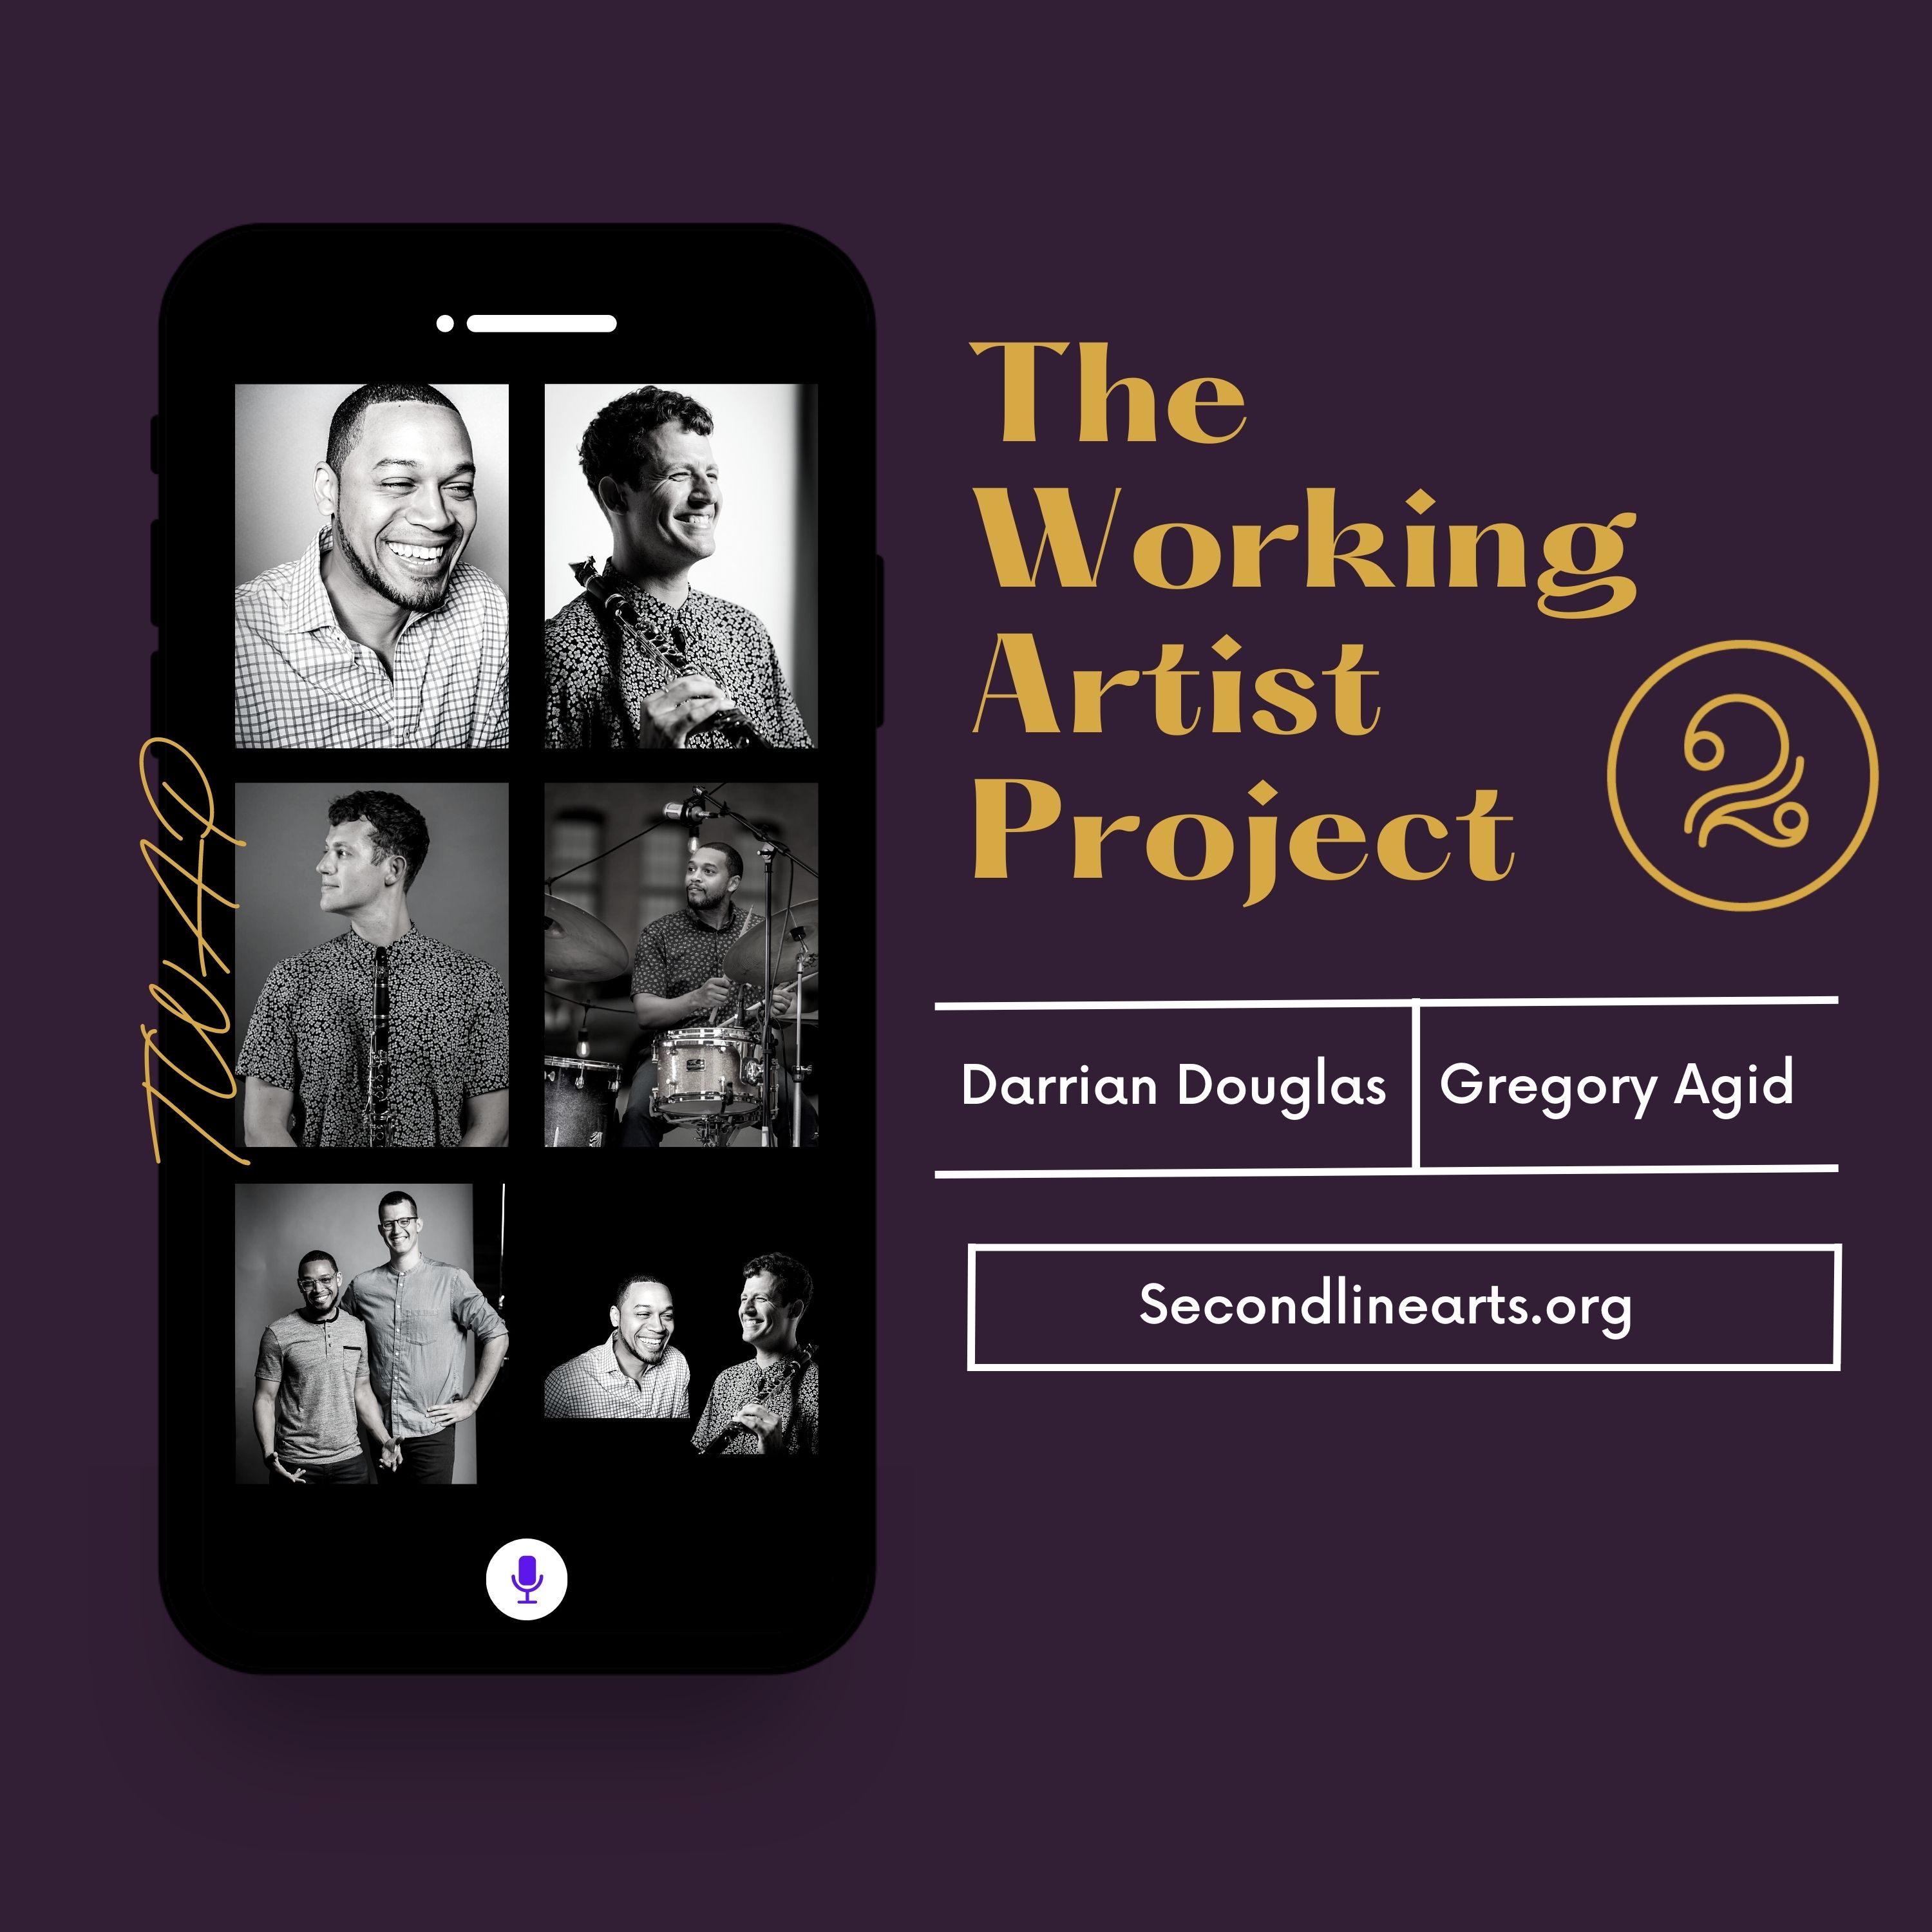 Artwork for The Working Artist Project